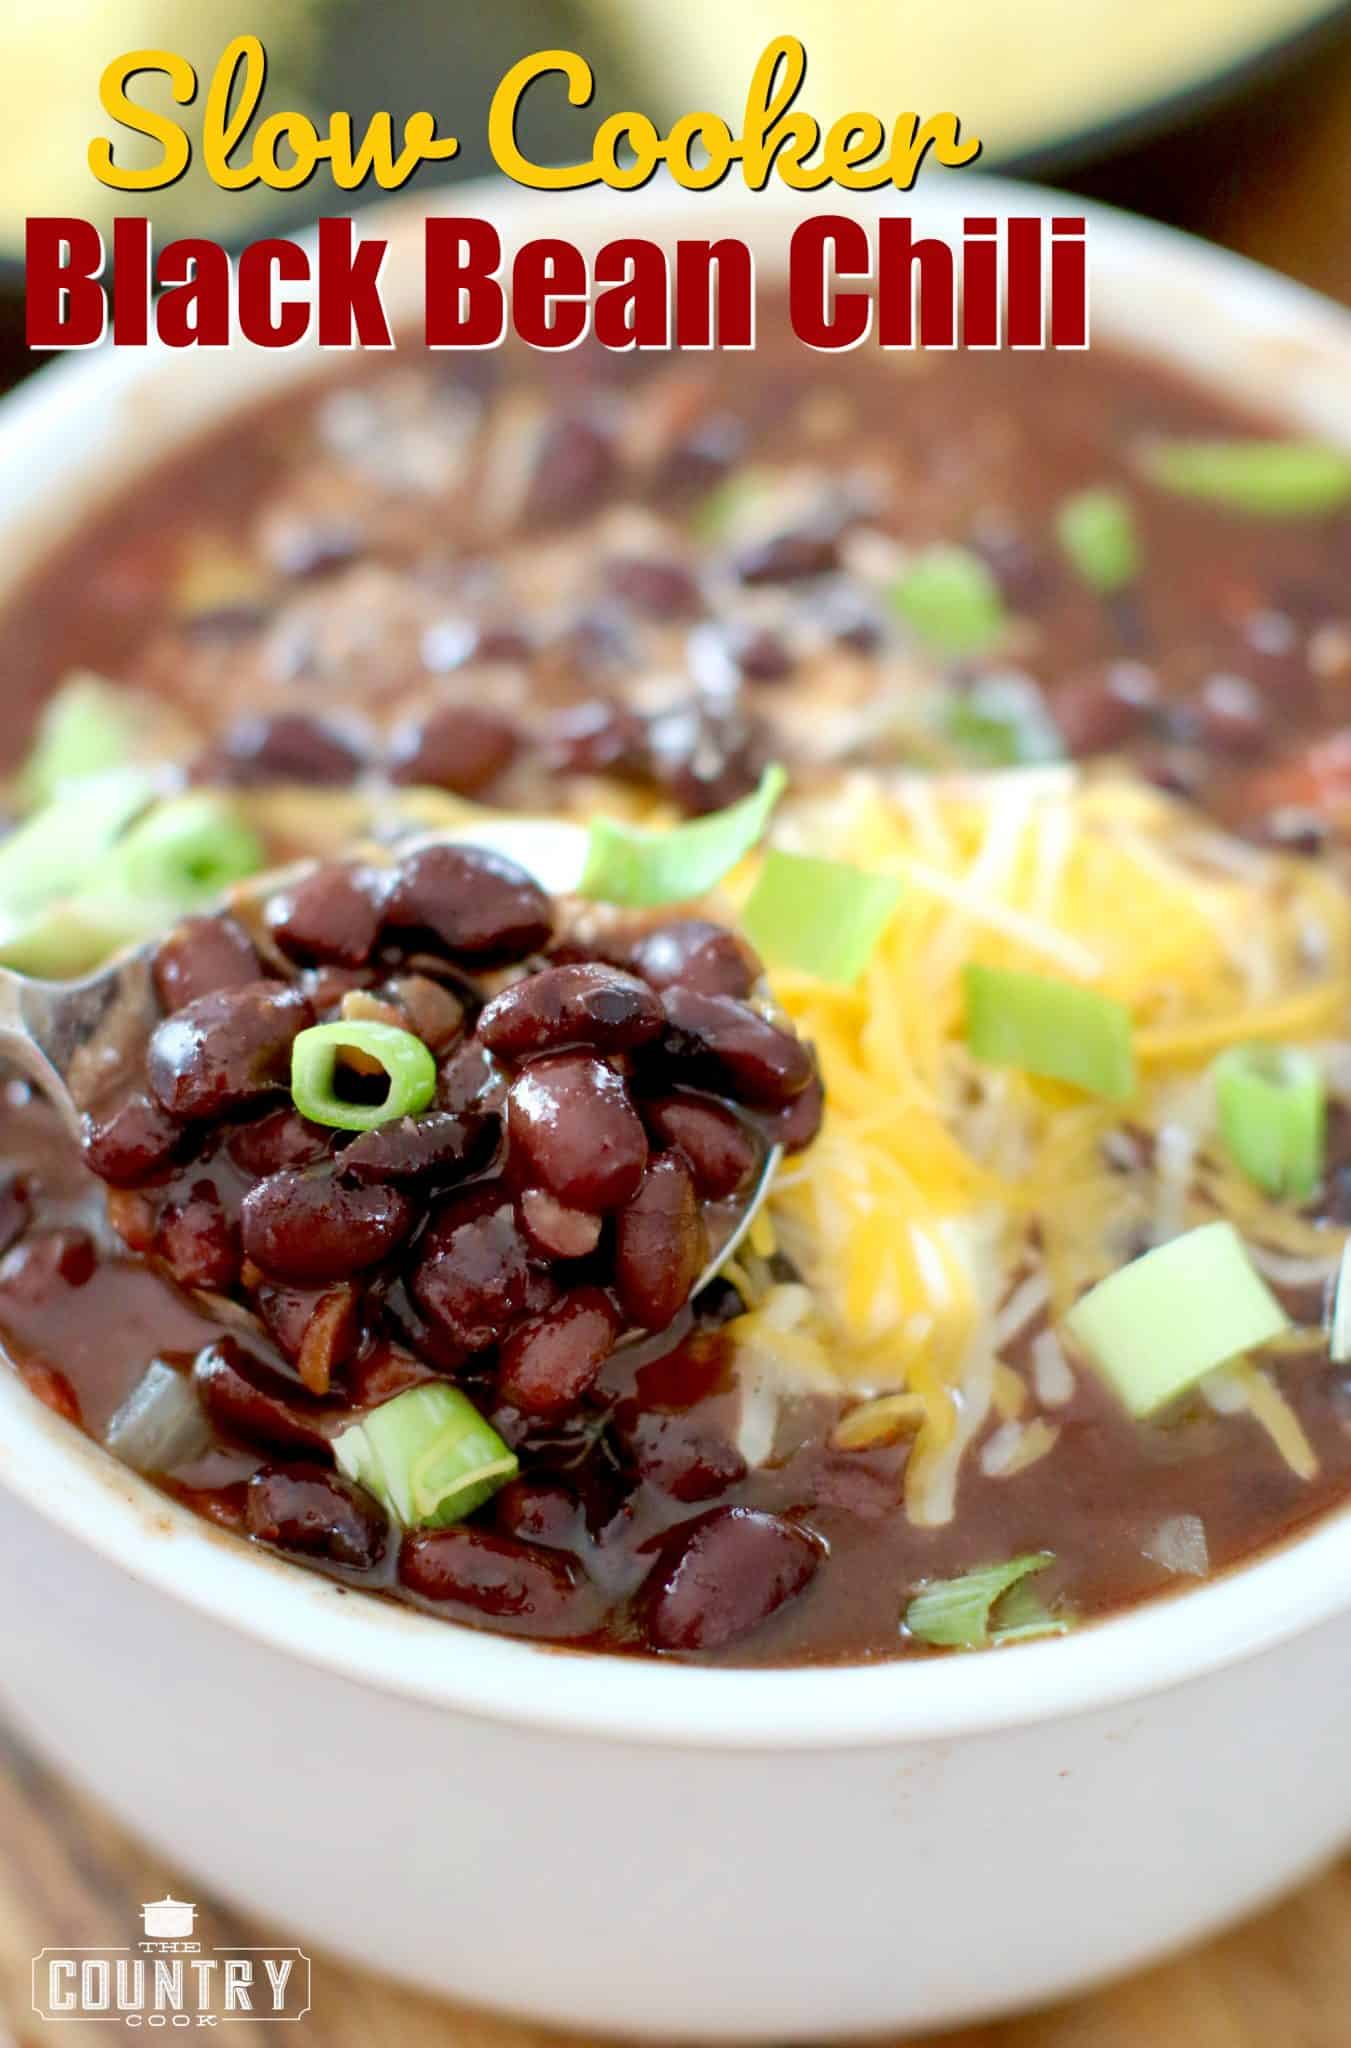 Slow Cooker Black Bean Chili recipe from The Country Cook shown in a white soup bowl with a spoon.